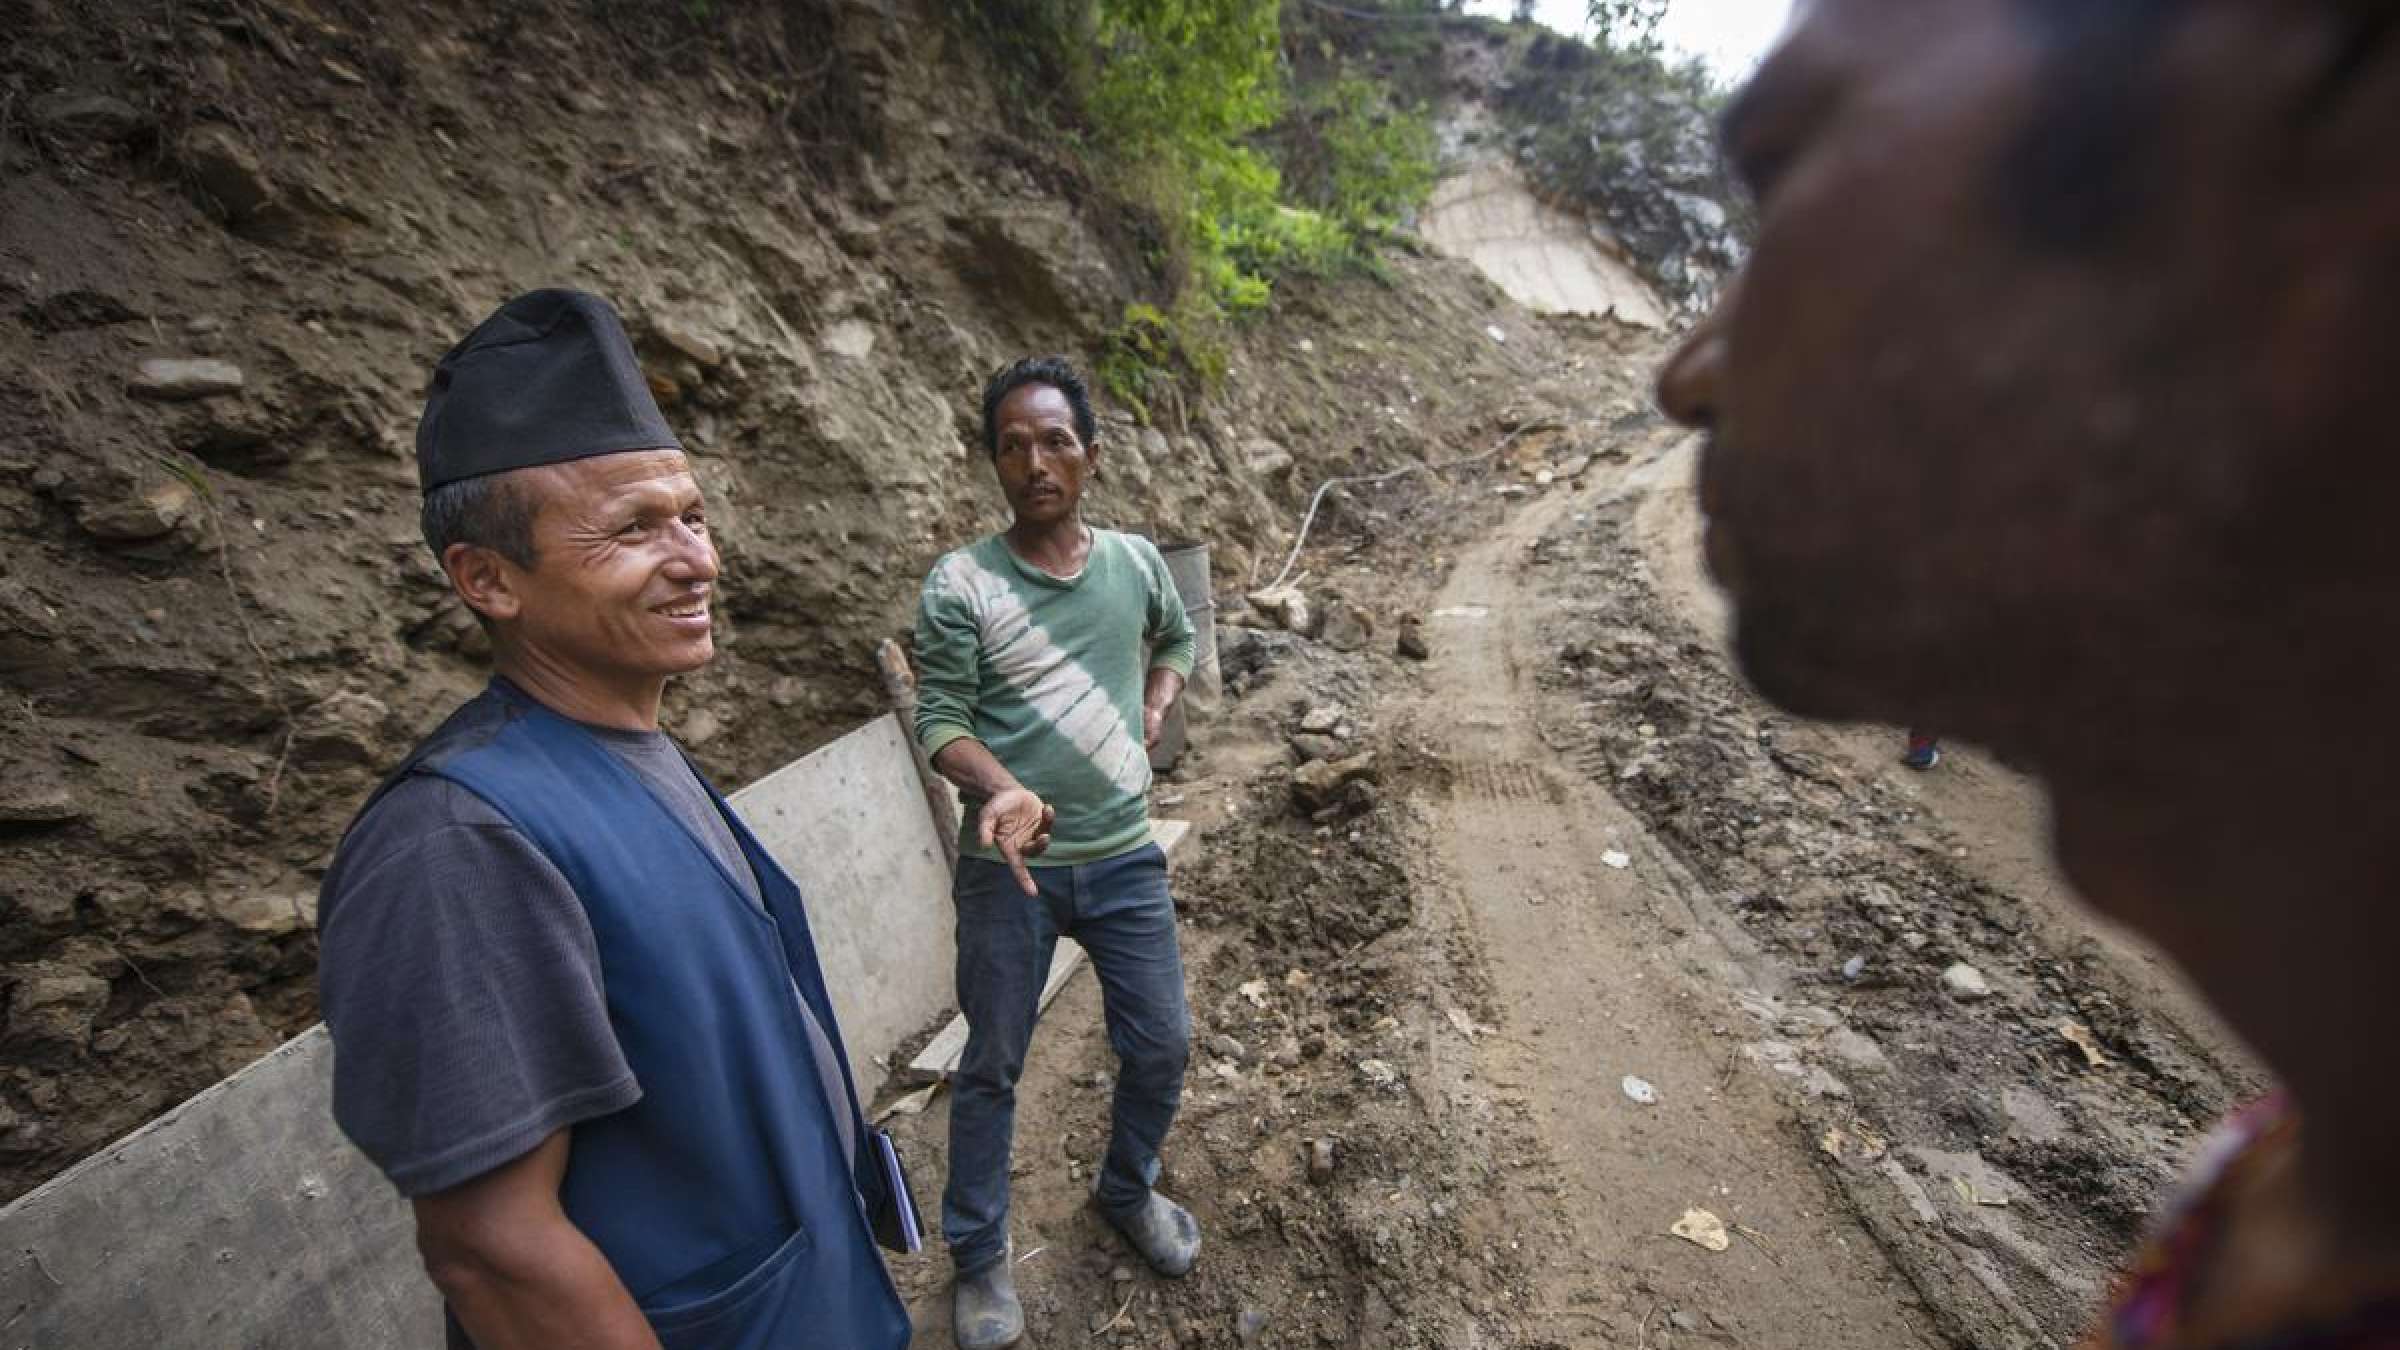 Nepal - Badil Lama is an engineer trained in landslide mitigation by building safer roads